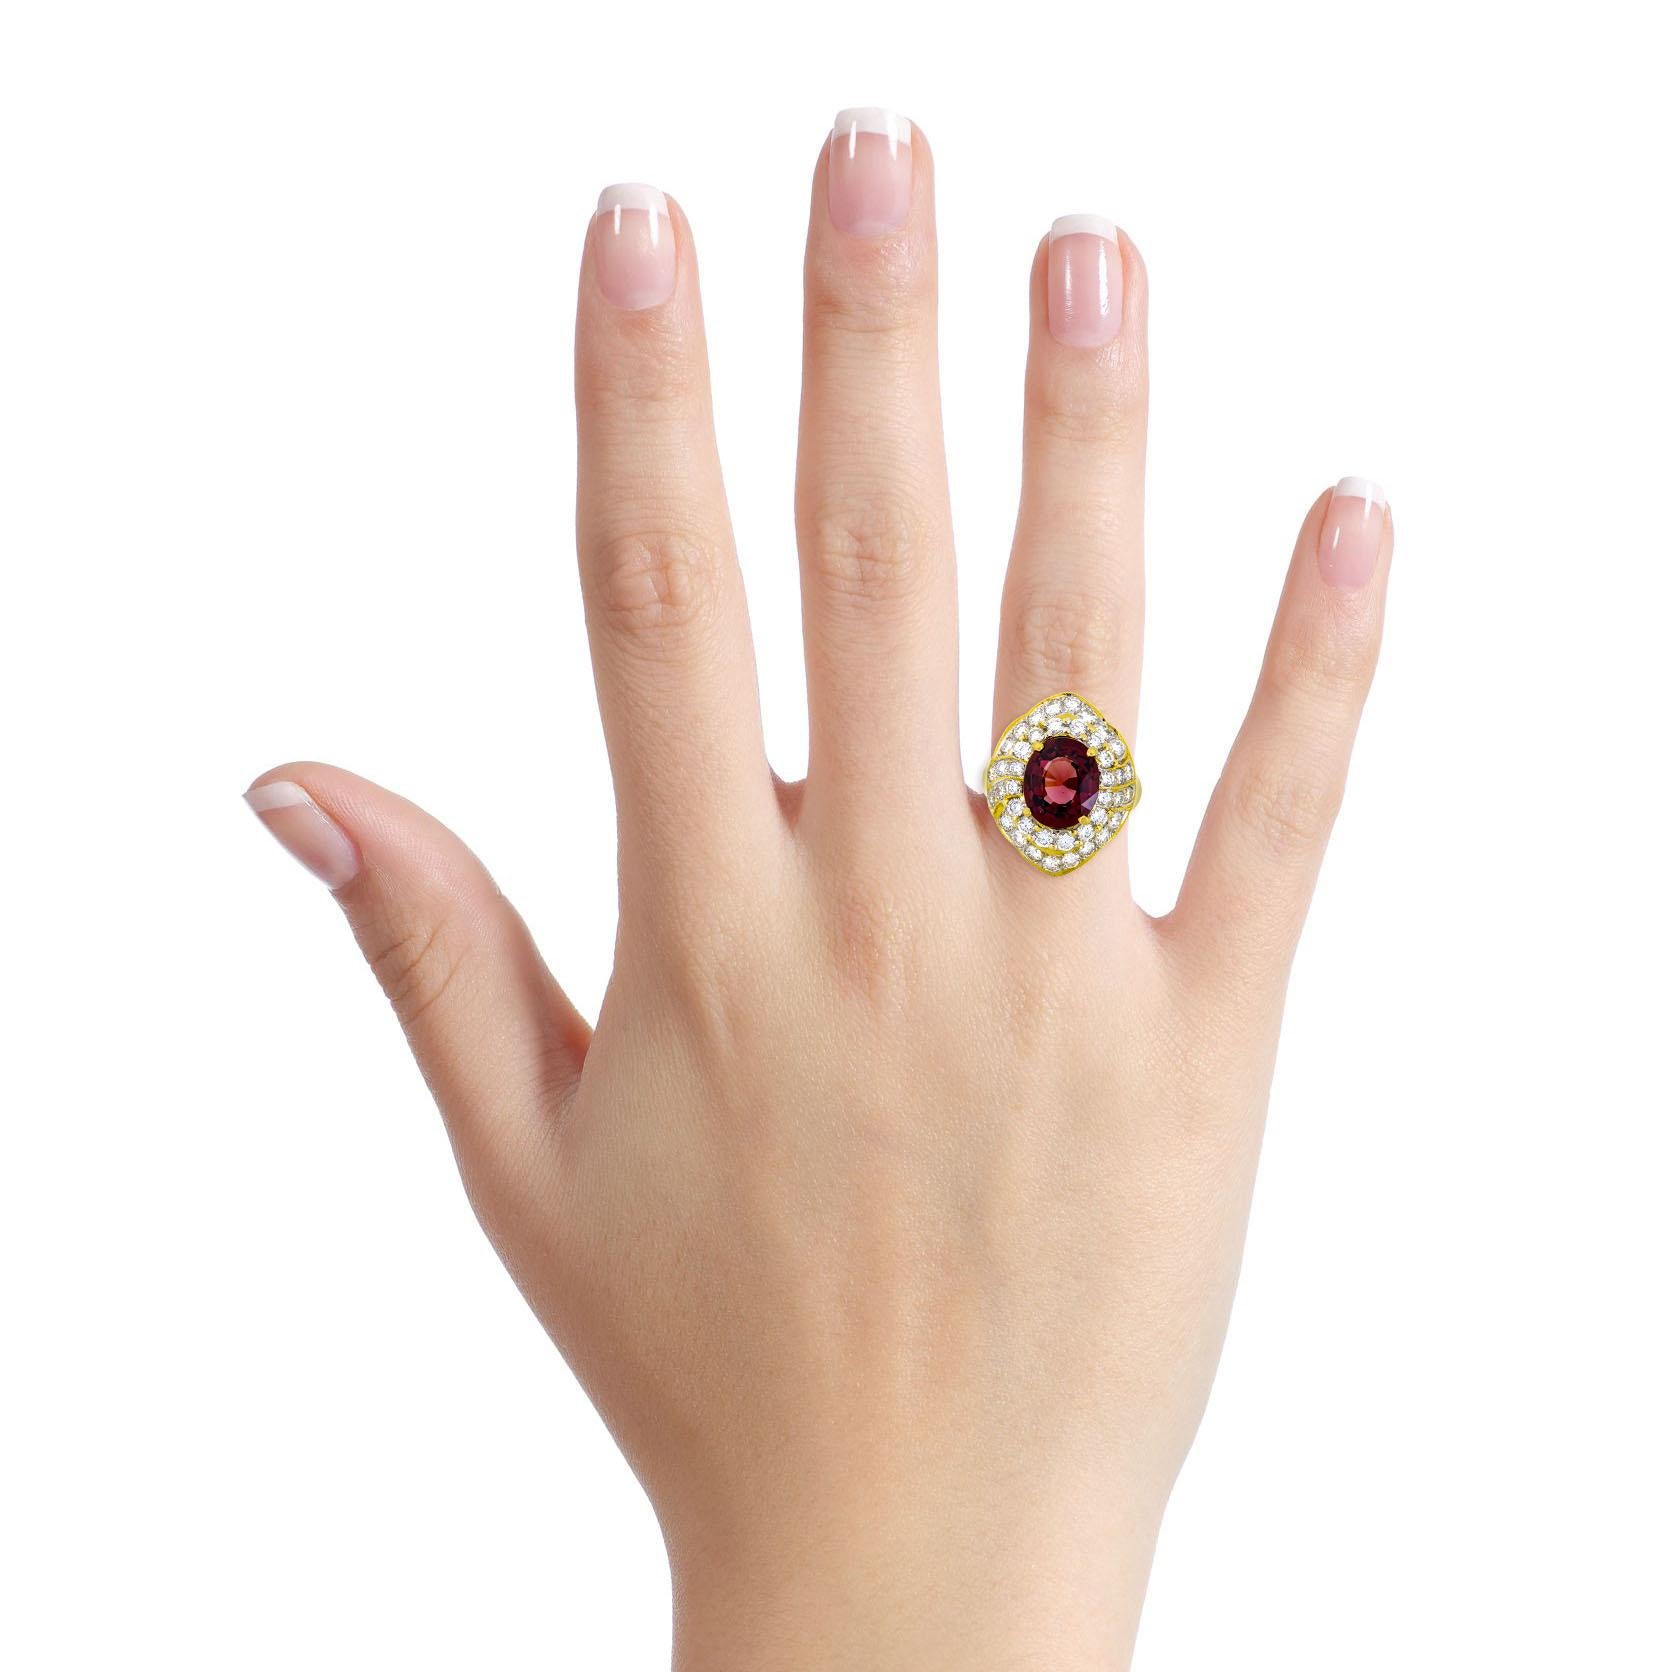 Red spinel and diamond cocktail ring in 18-karat yellow gold. Polished metal setting with an oval-cut unheated natural red spinel at the center surrounded by numerous near-colorless round-cut diamonds. The spinel weighs 3.25 carats and comes with a